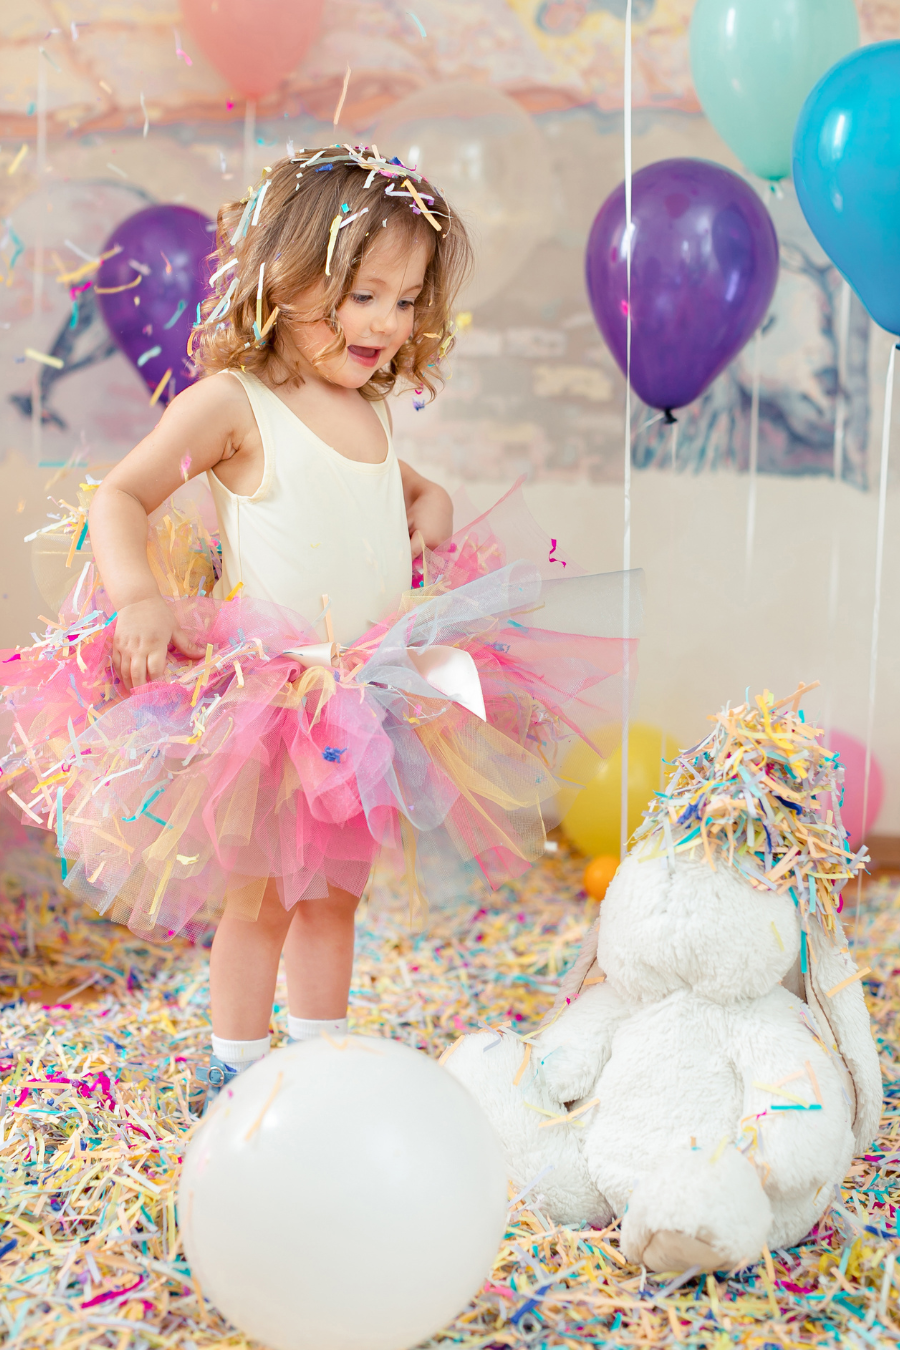 Make an Awesome Birthday Party For Your Kids